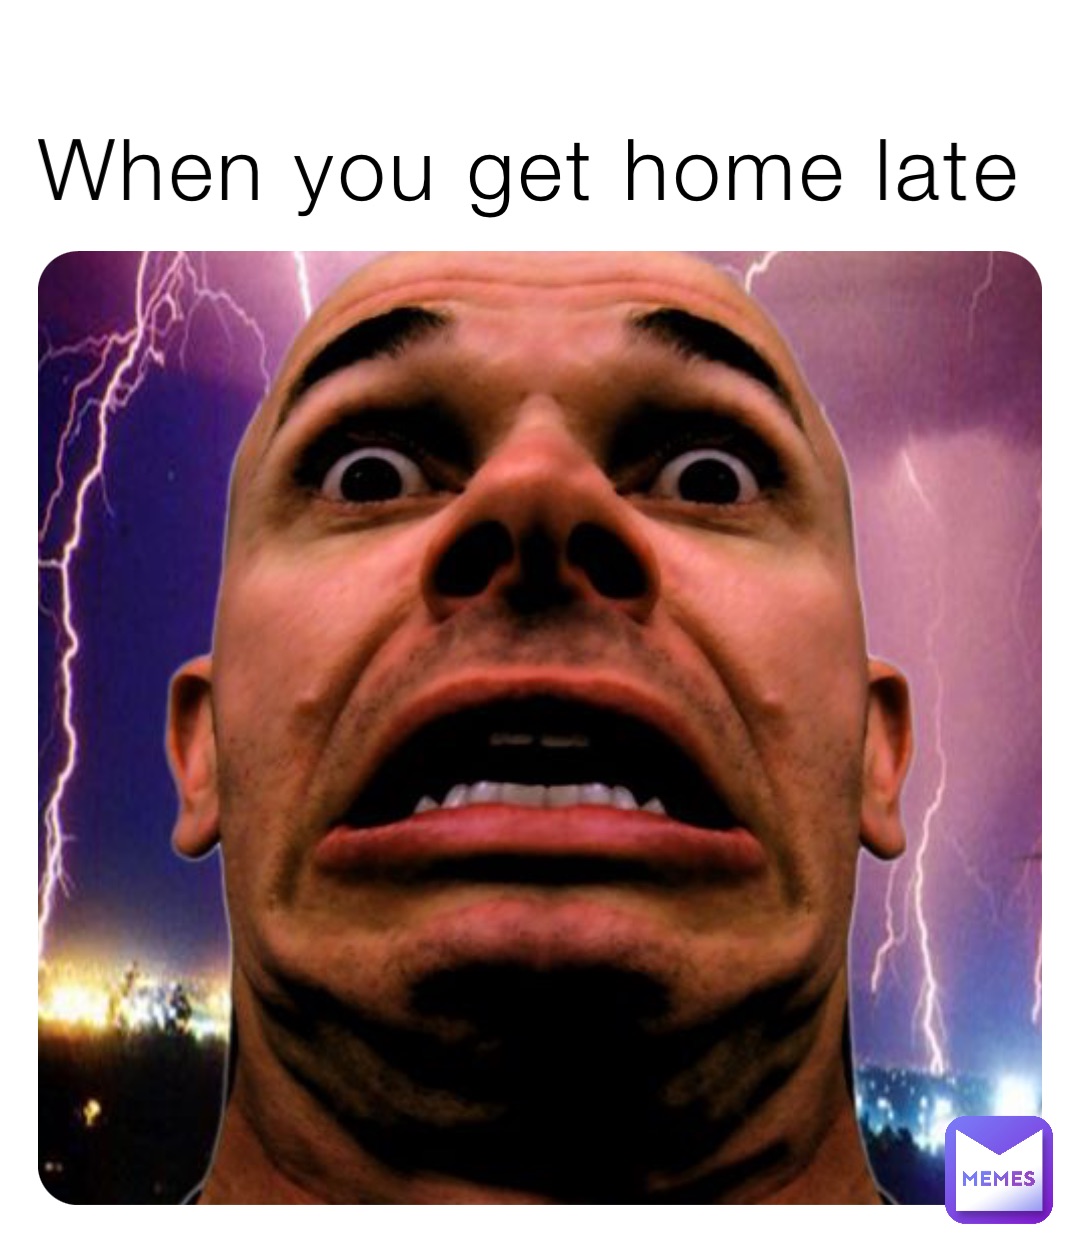 When you get home late